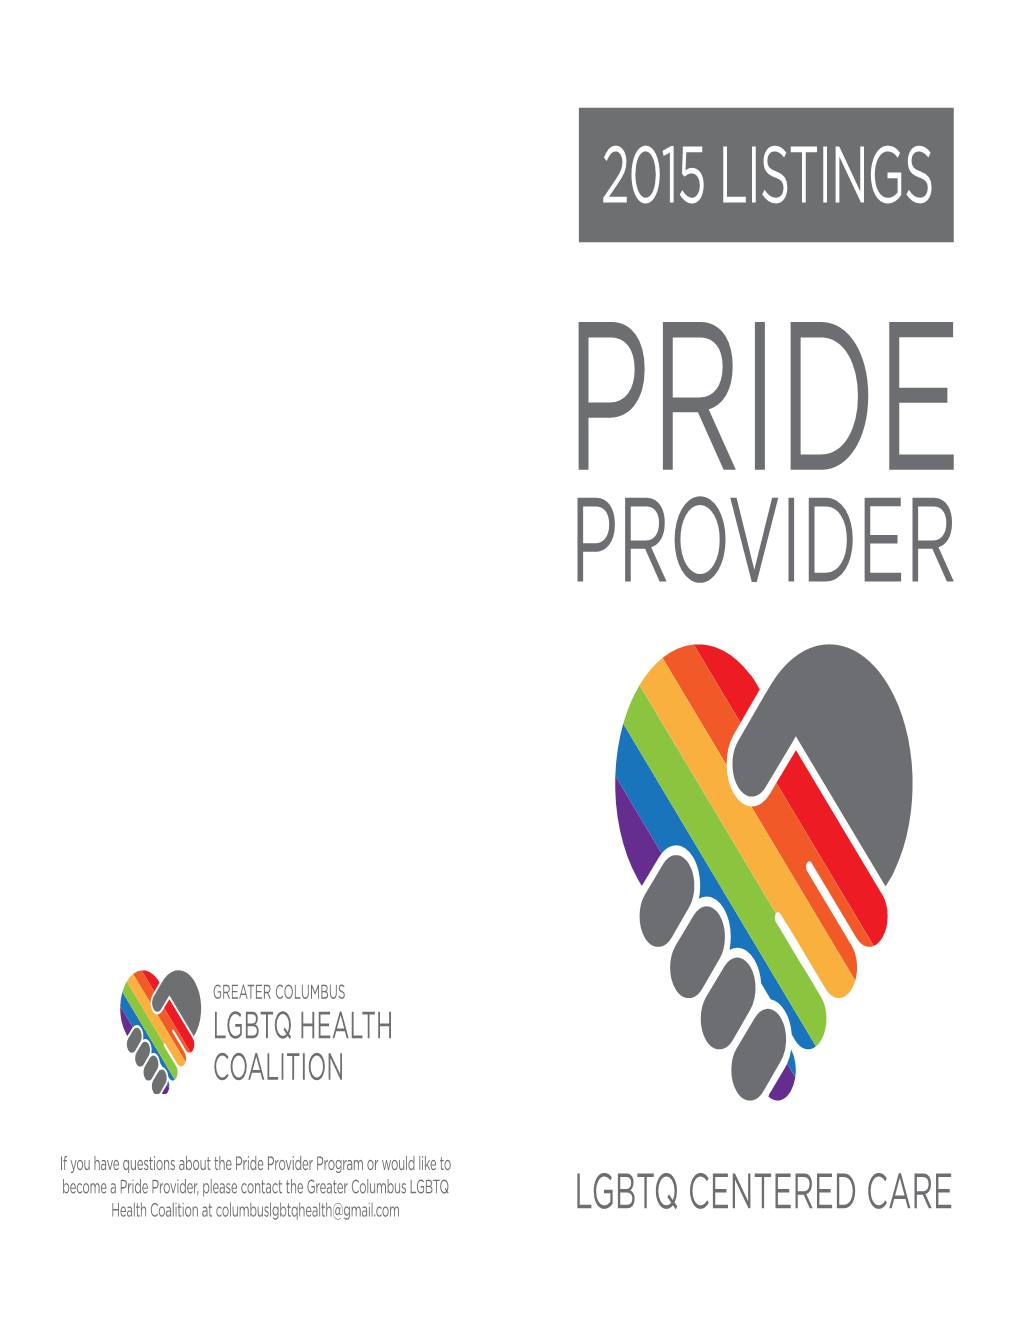 If You Have Questions About the Pride Provider Program Or Would Like To